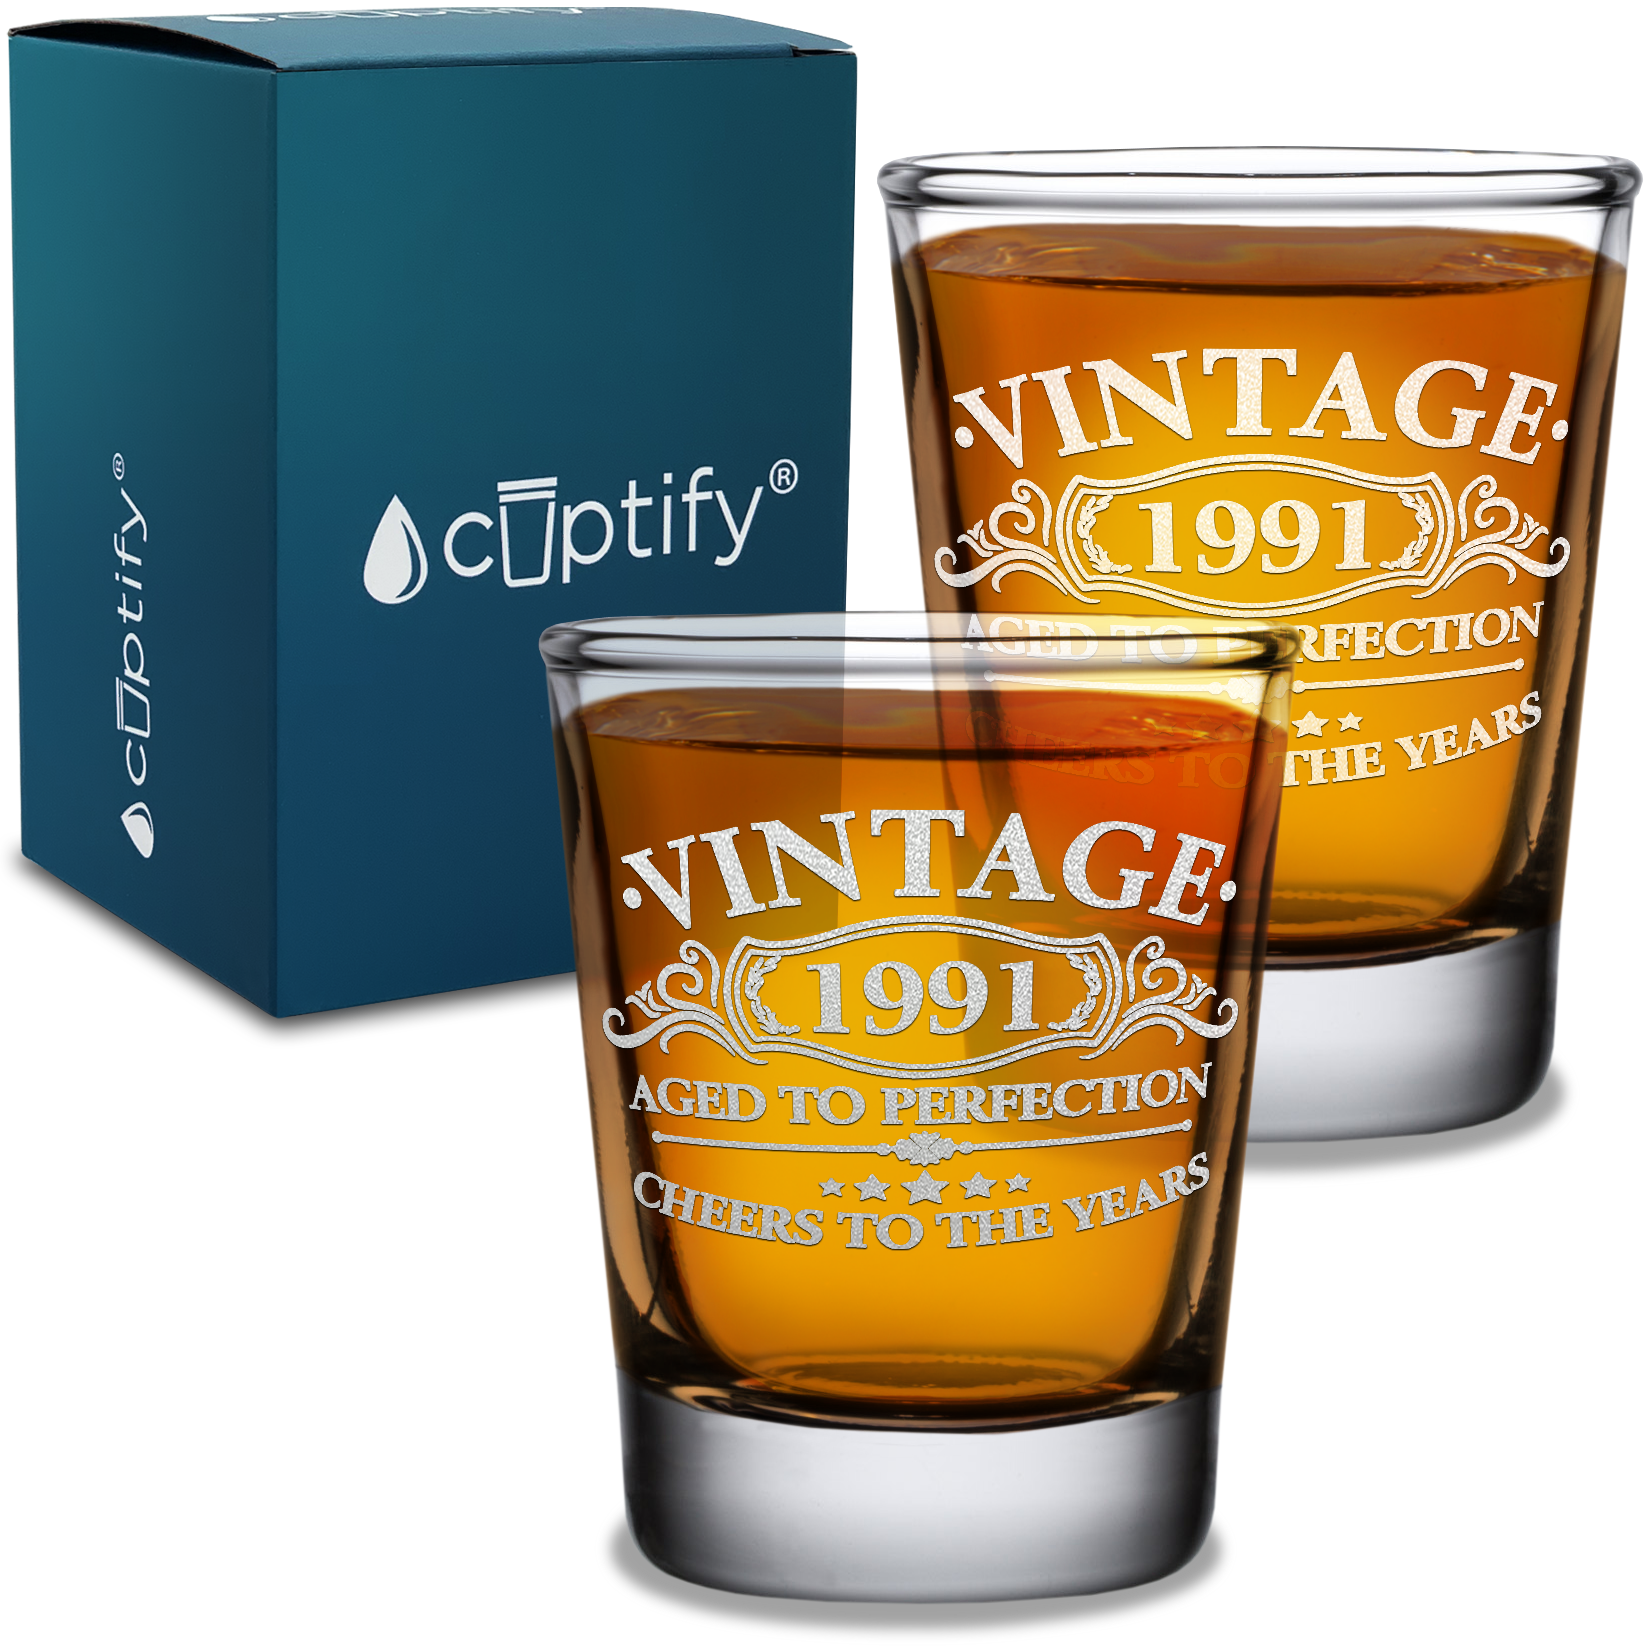 Vintage Aged To Perfection Cheers To 30 Years 1991 Laser Engraved on 2oz Shot Glasses - Set of 2